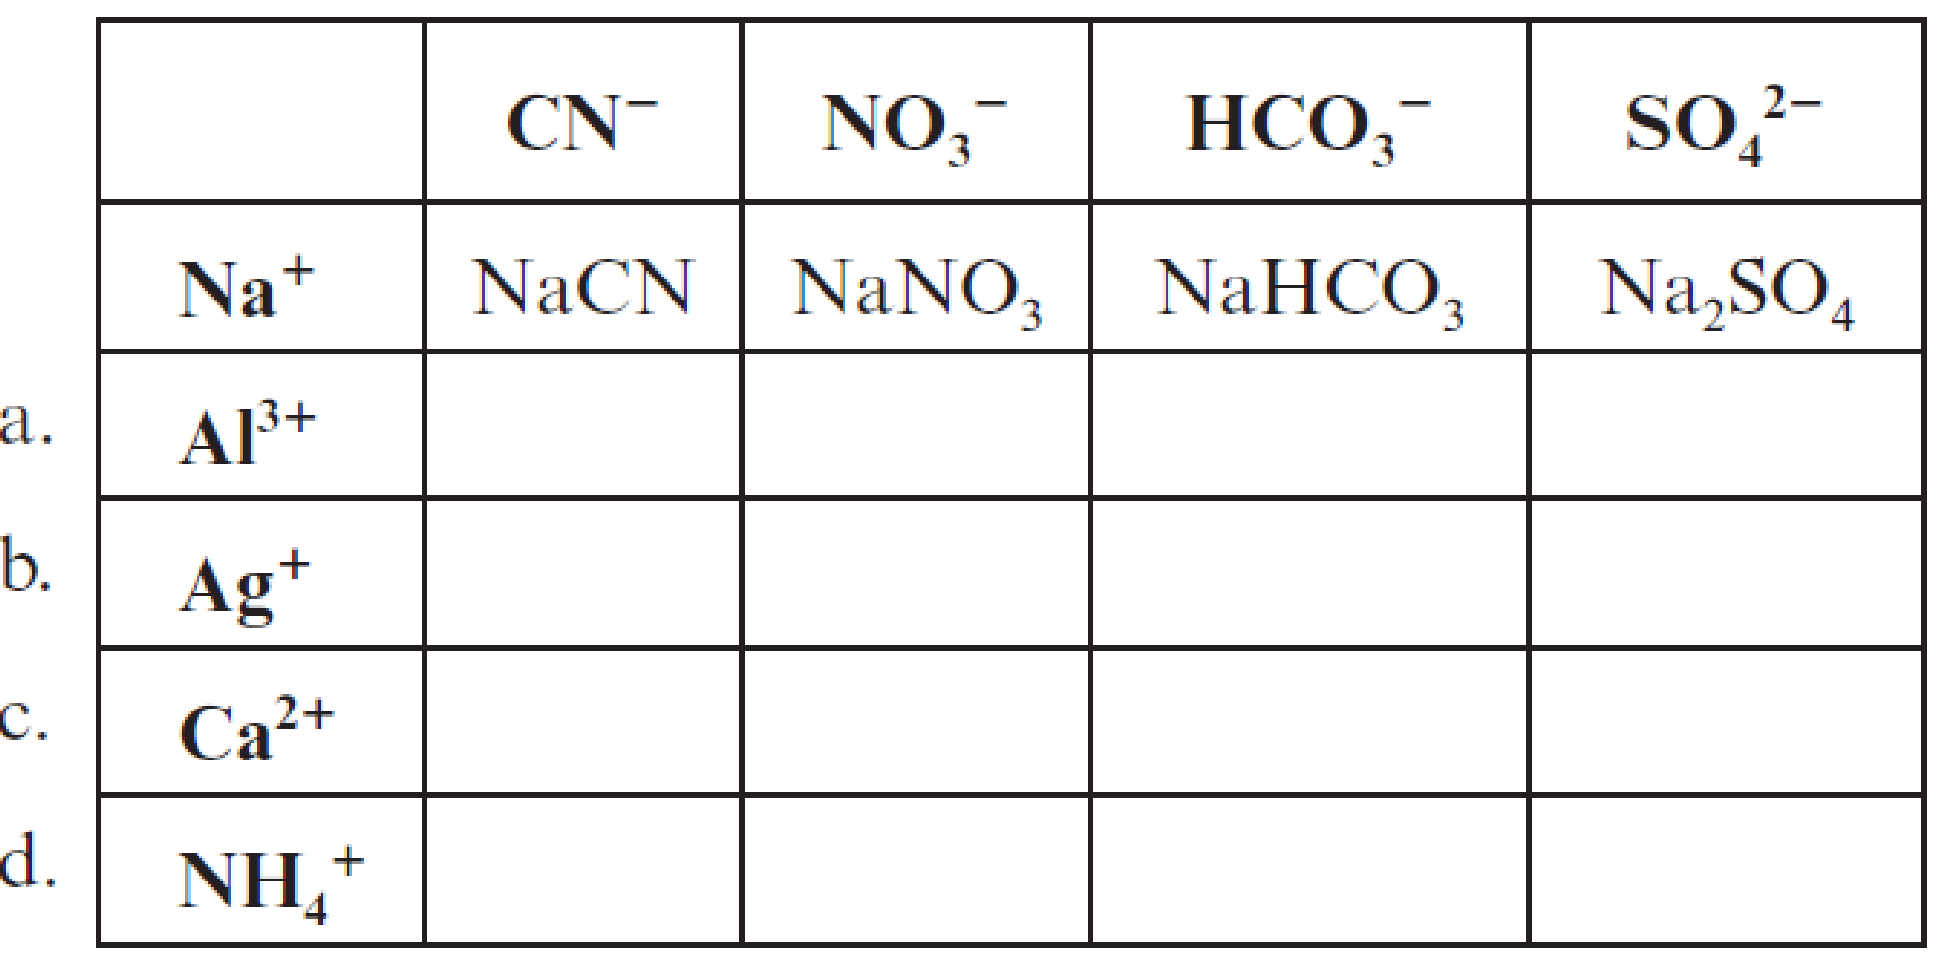 Fill In The Blanks To Complete The Following Table Of Chemical Formulas For Polyatomic Ion Containing Ionic Compounds For Each Compound The Positive Ion Present Is Listed On The Left Side Of The Table